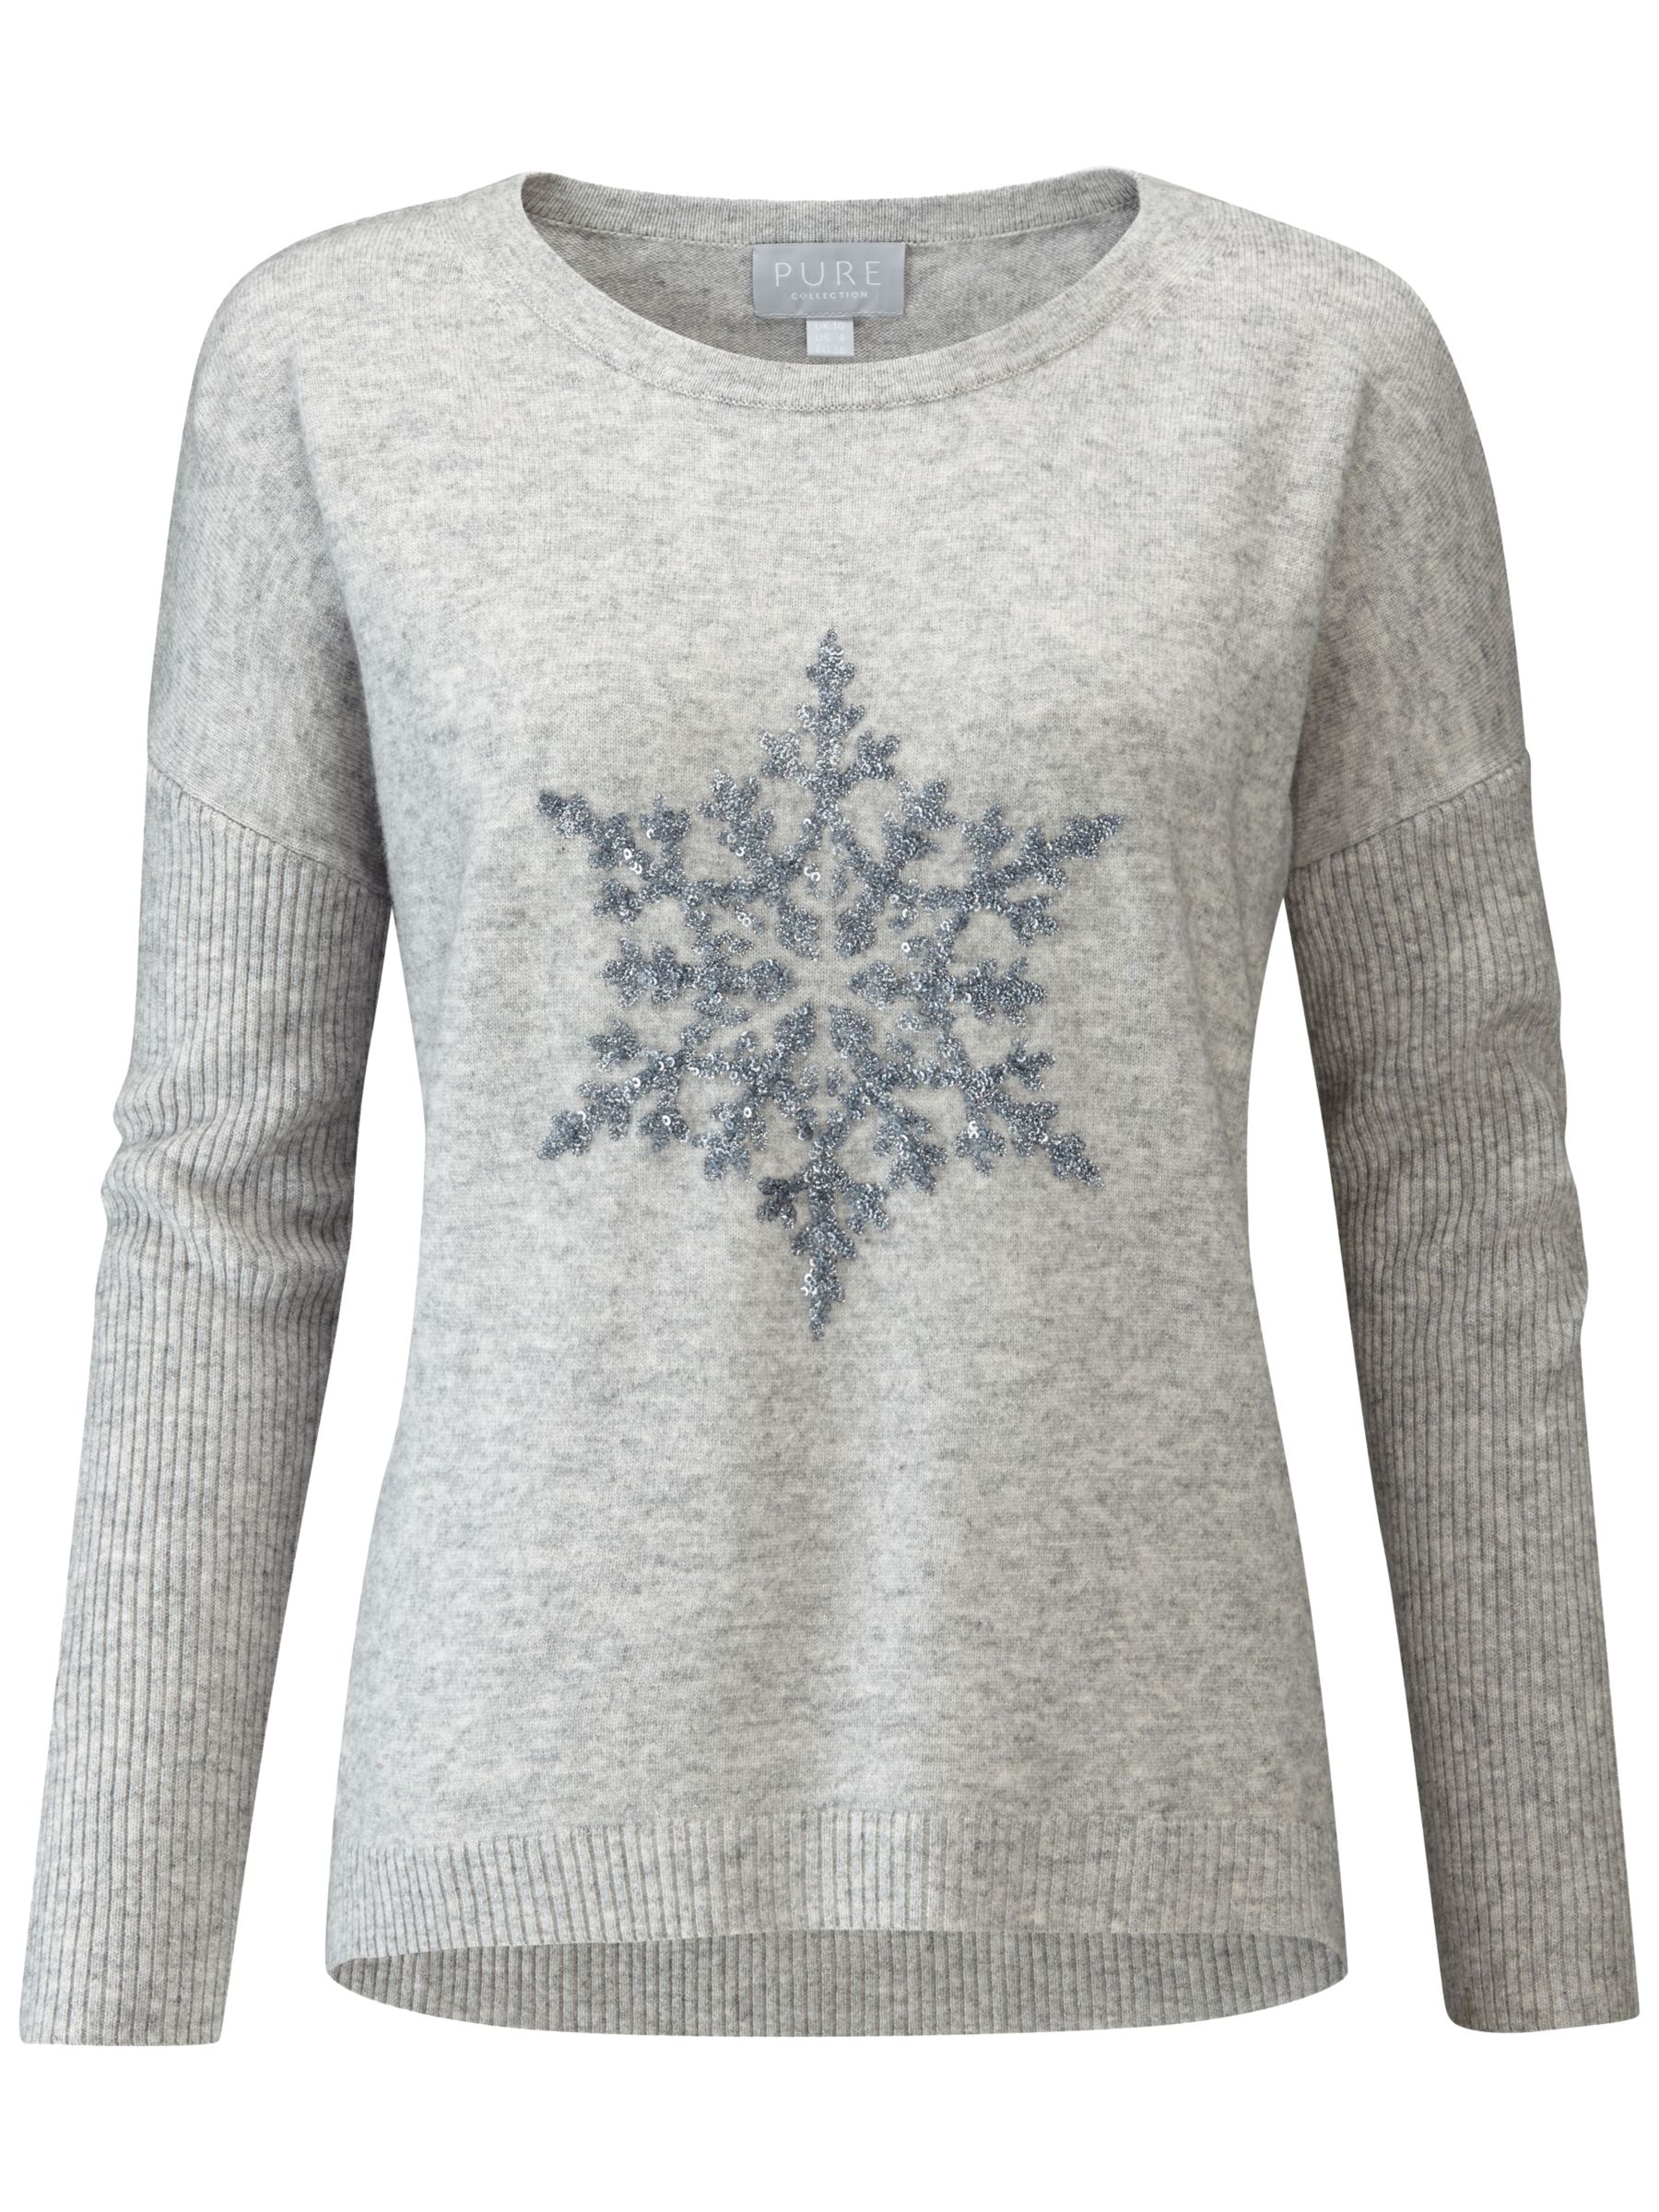 Pure Collection Sparkle Snowflake Dipped Hem Jumper, Grey, 12